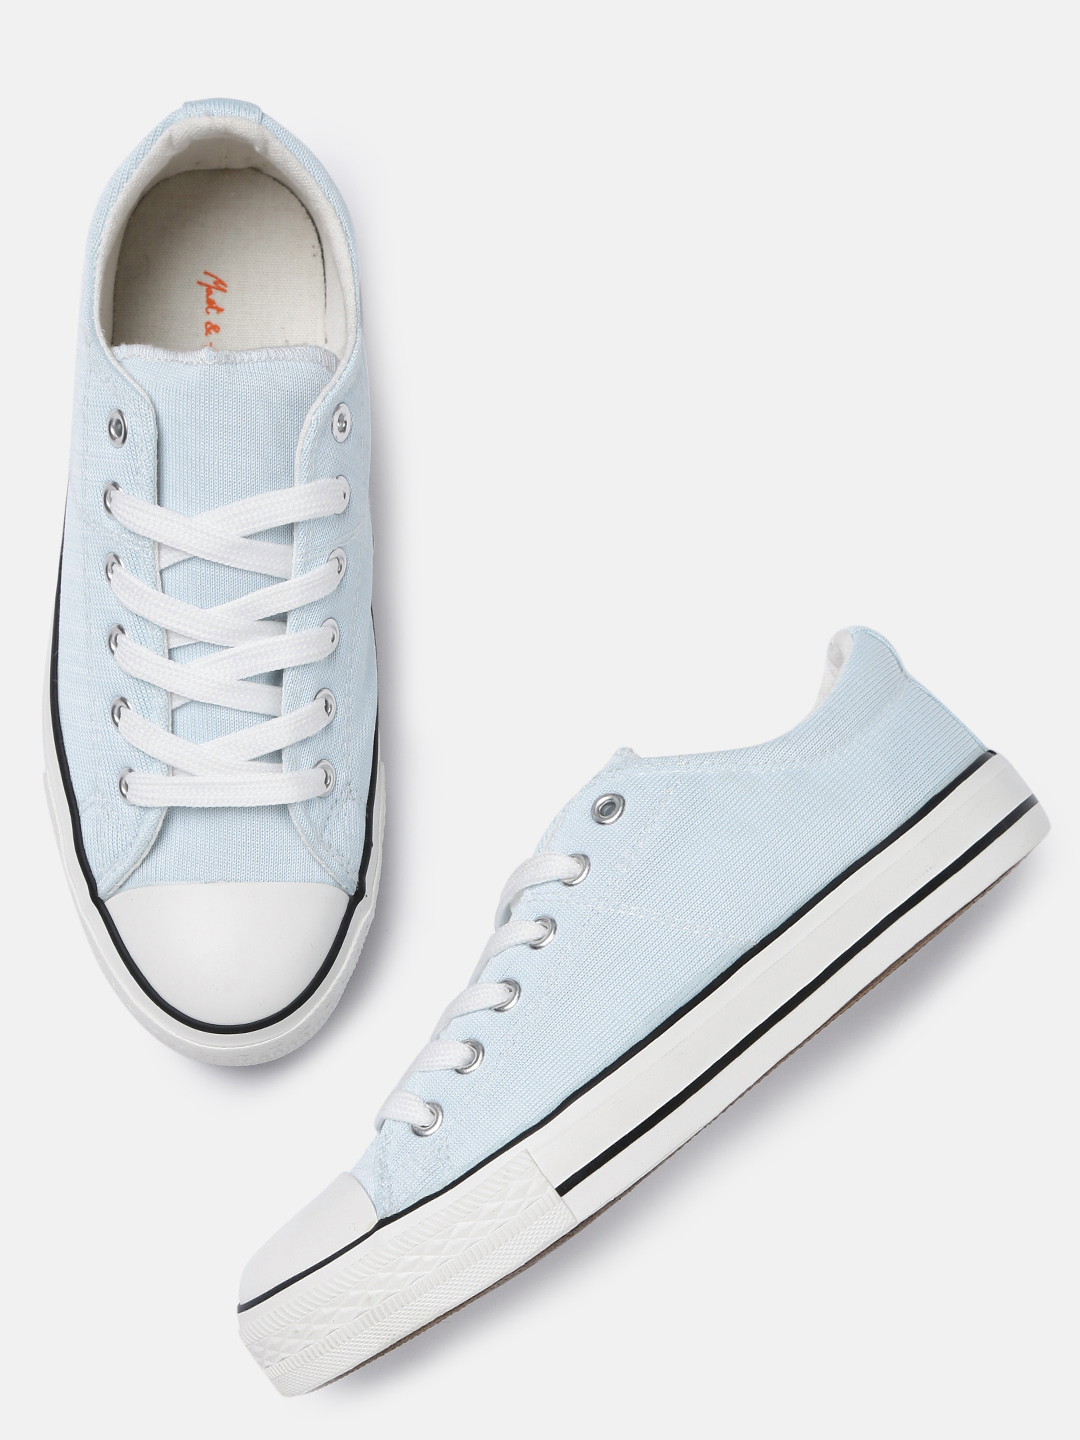 Mast & Harbour Women Blue Sneakers Price in India